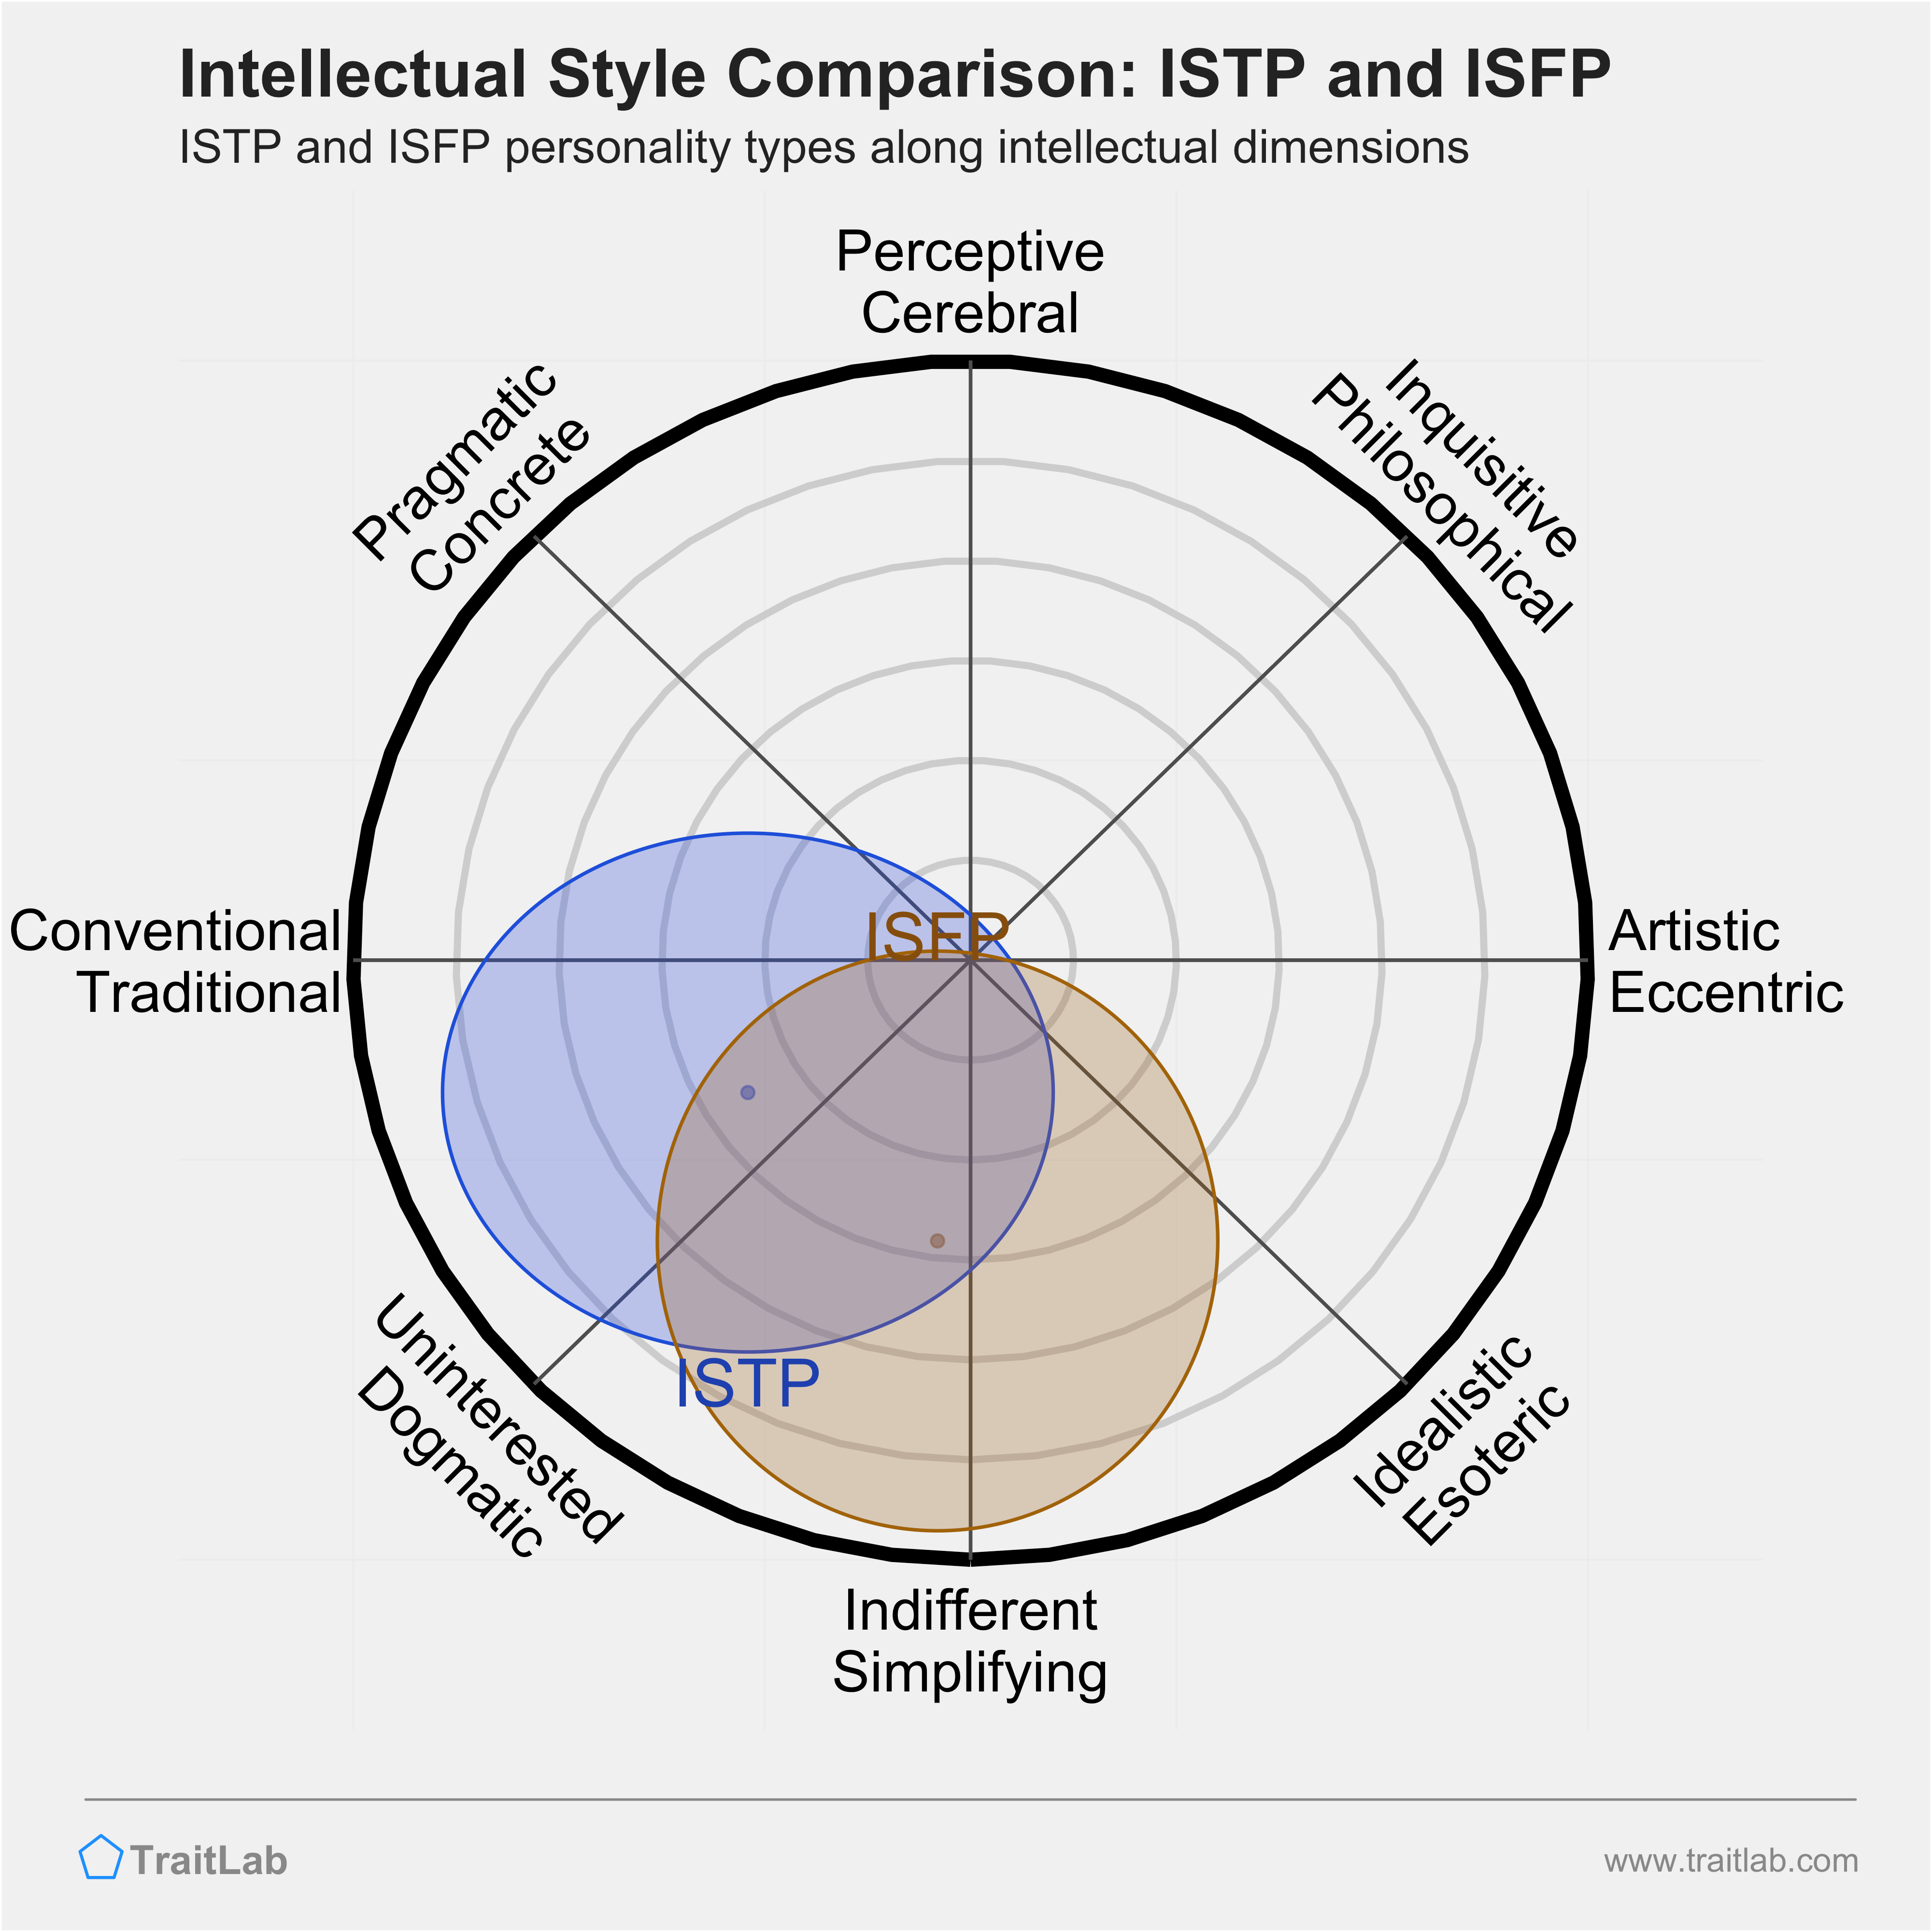 ISTP and ISFP comparison across intellectual dimensions